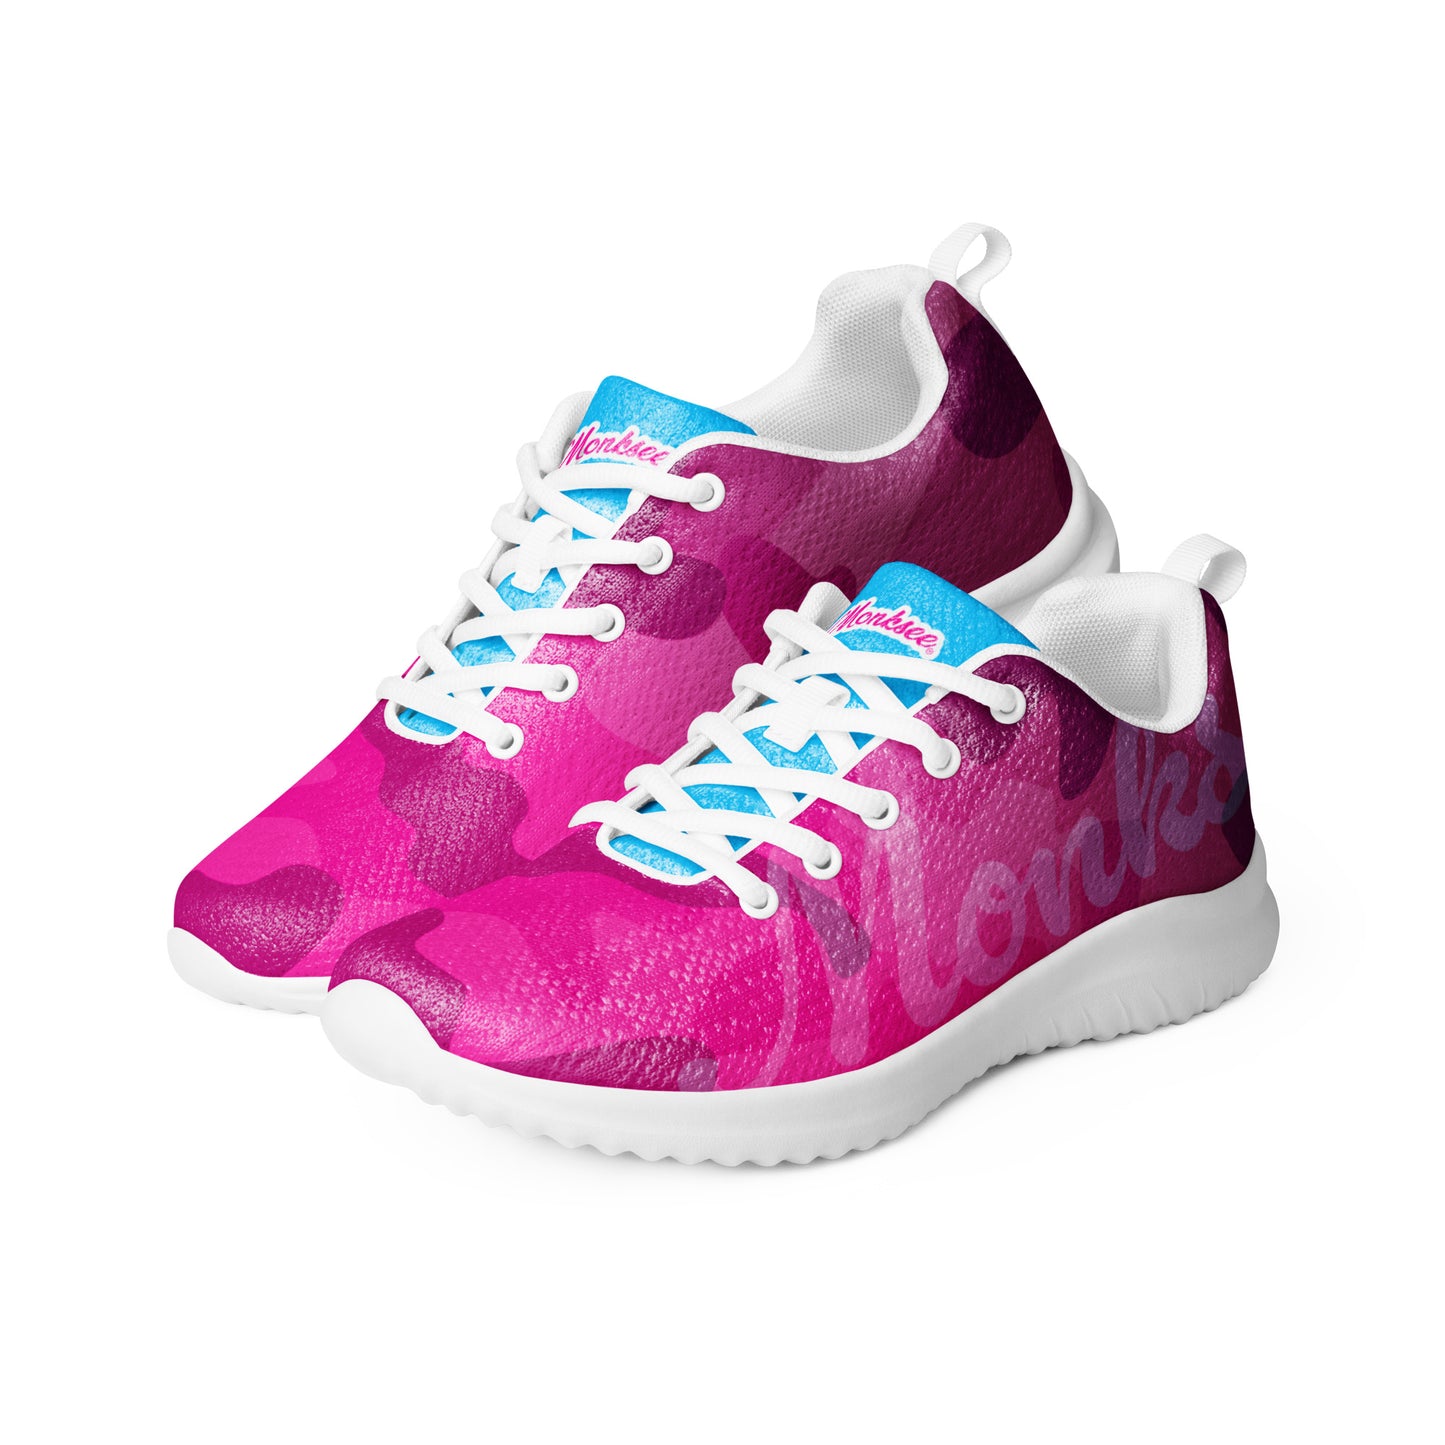 Move Girl - Womens trainers